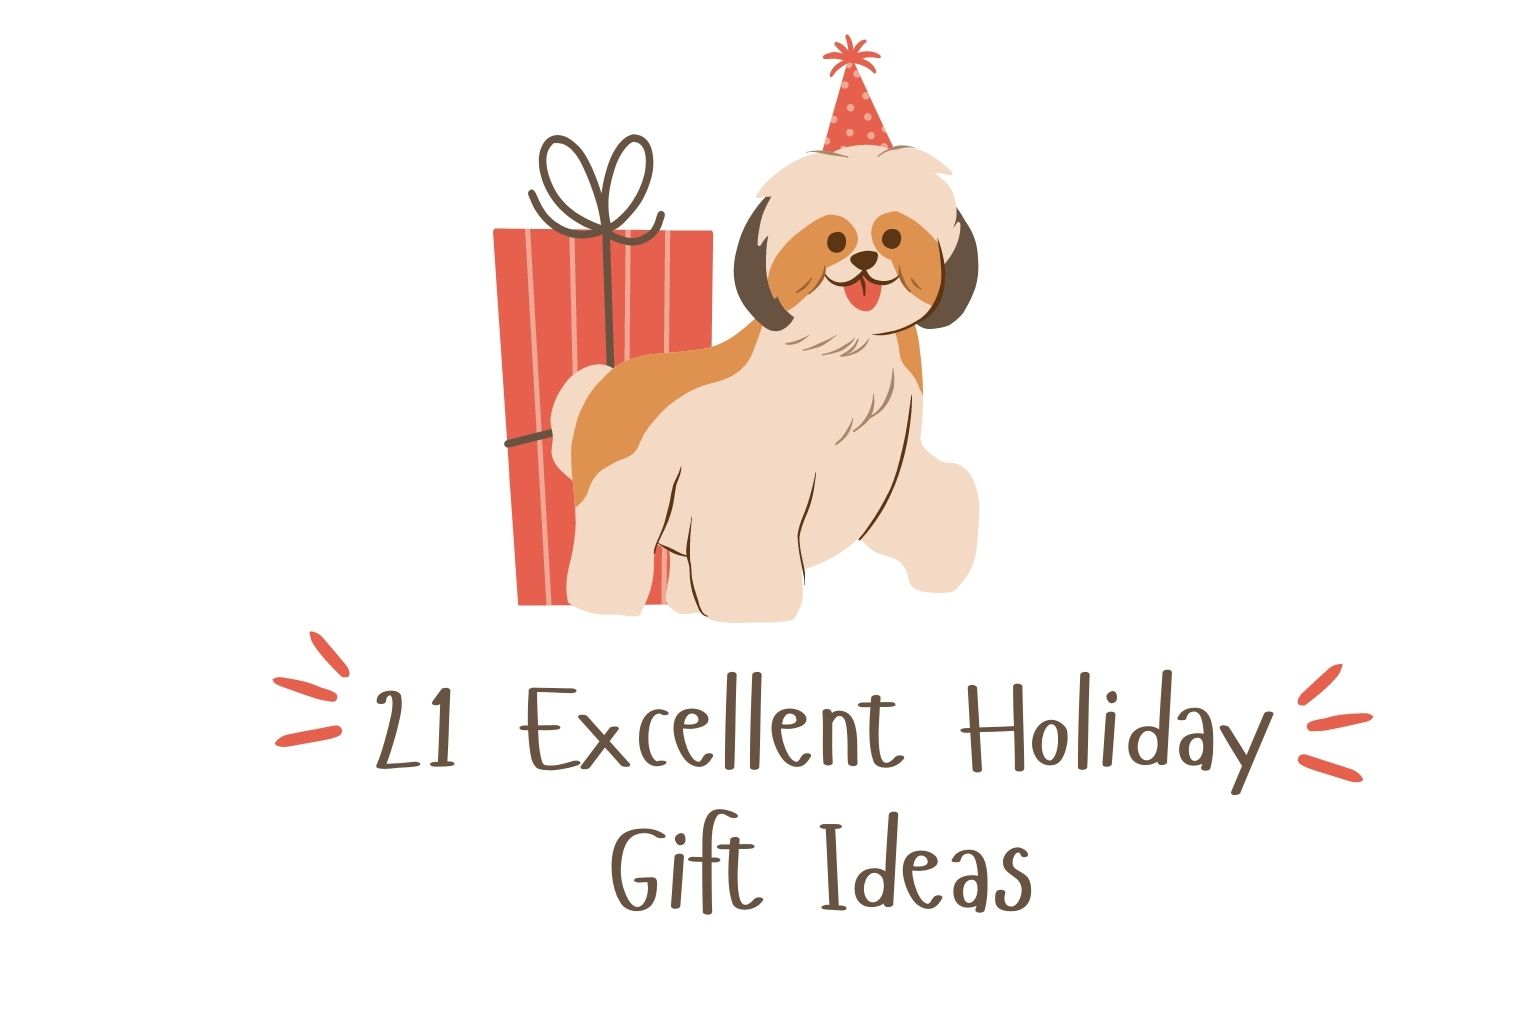 21 Excellent Holiday Gift Ideas